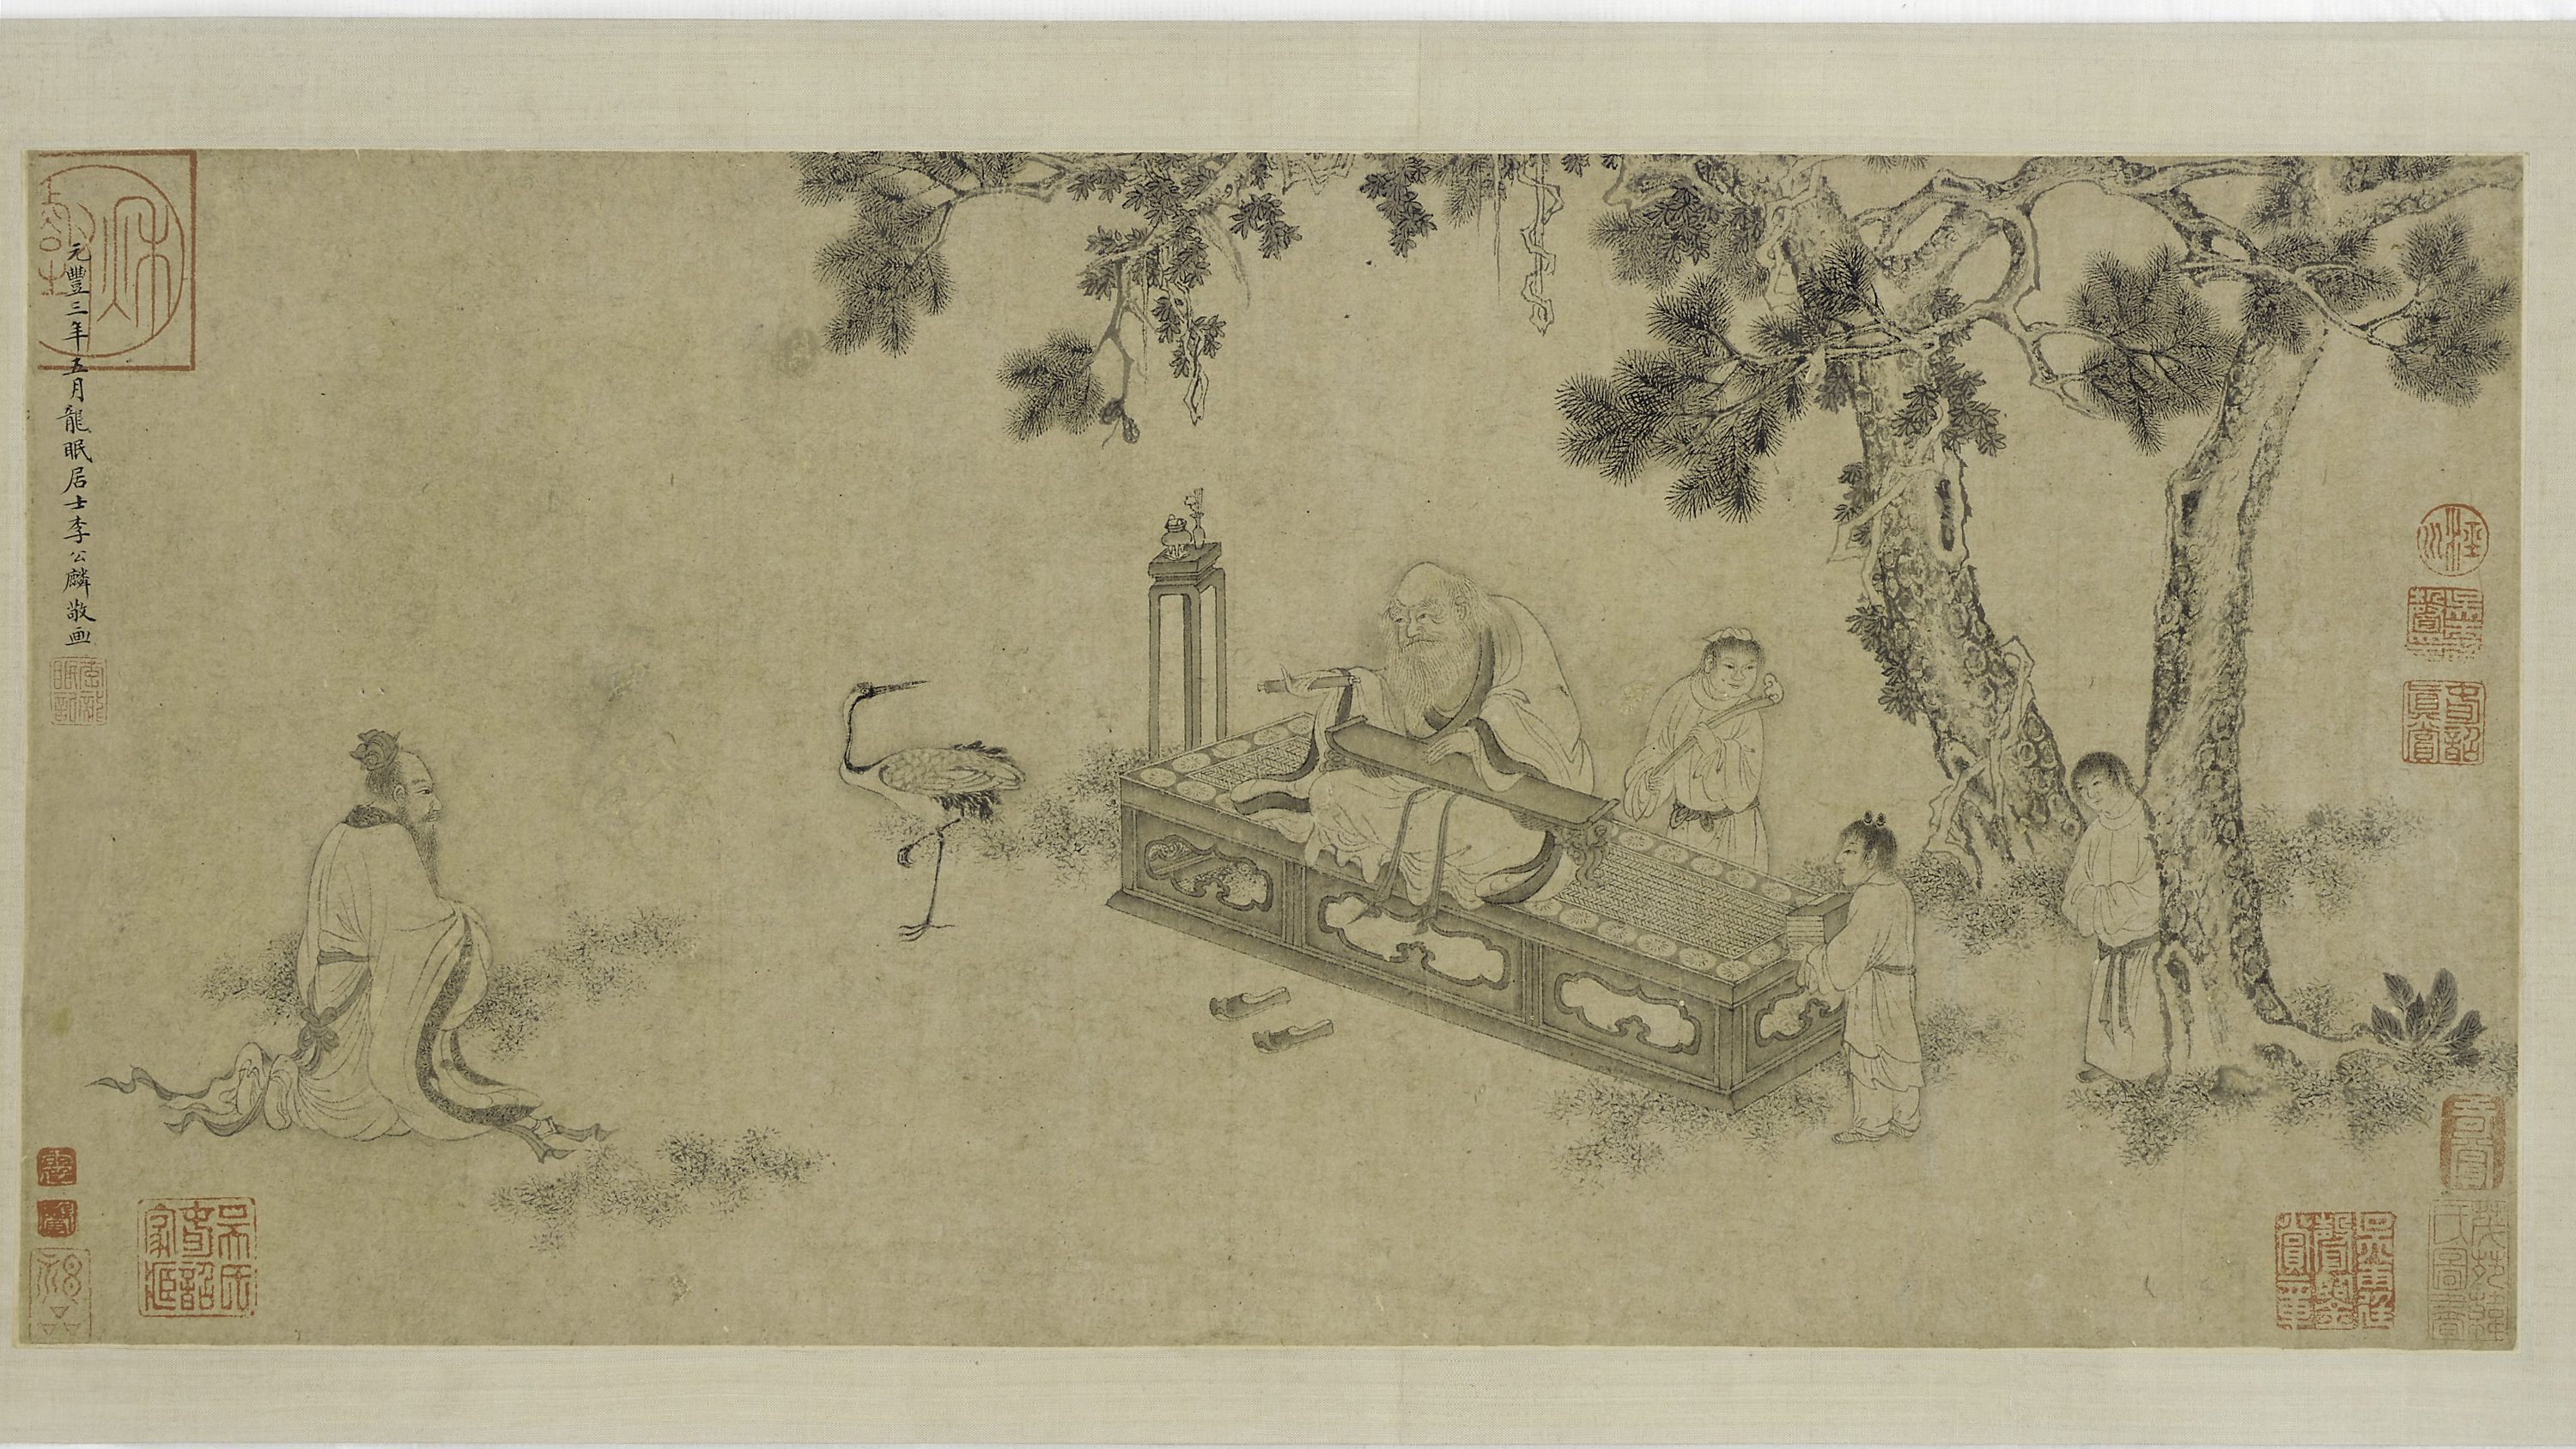 A 16th-century hand-scroll depicting Lao Tsu delivering the Tao Te Ching.